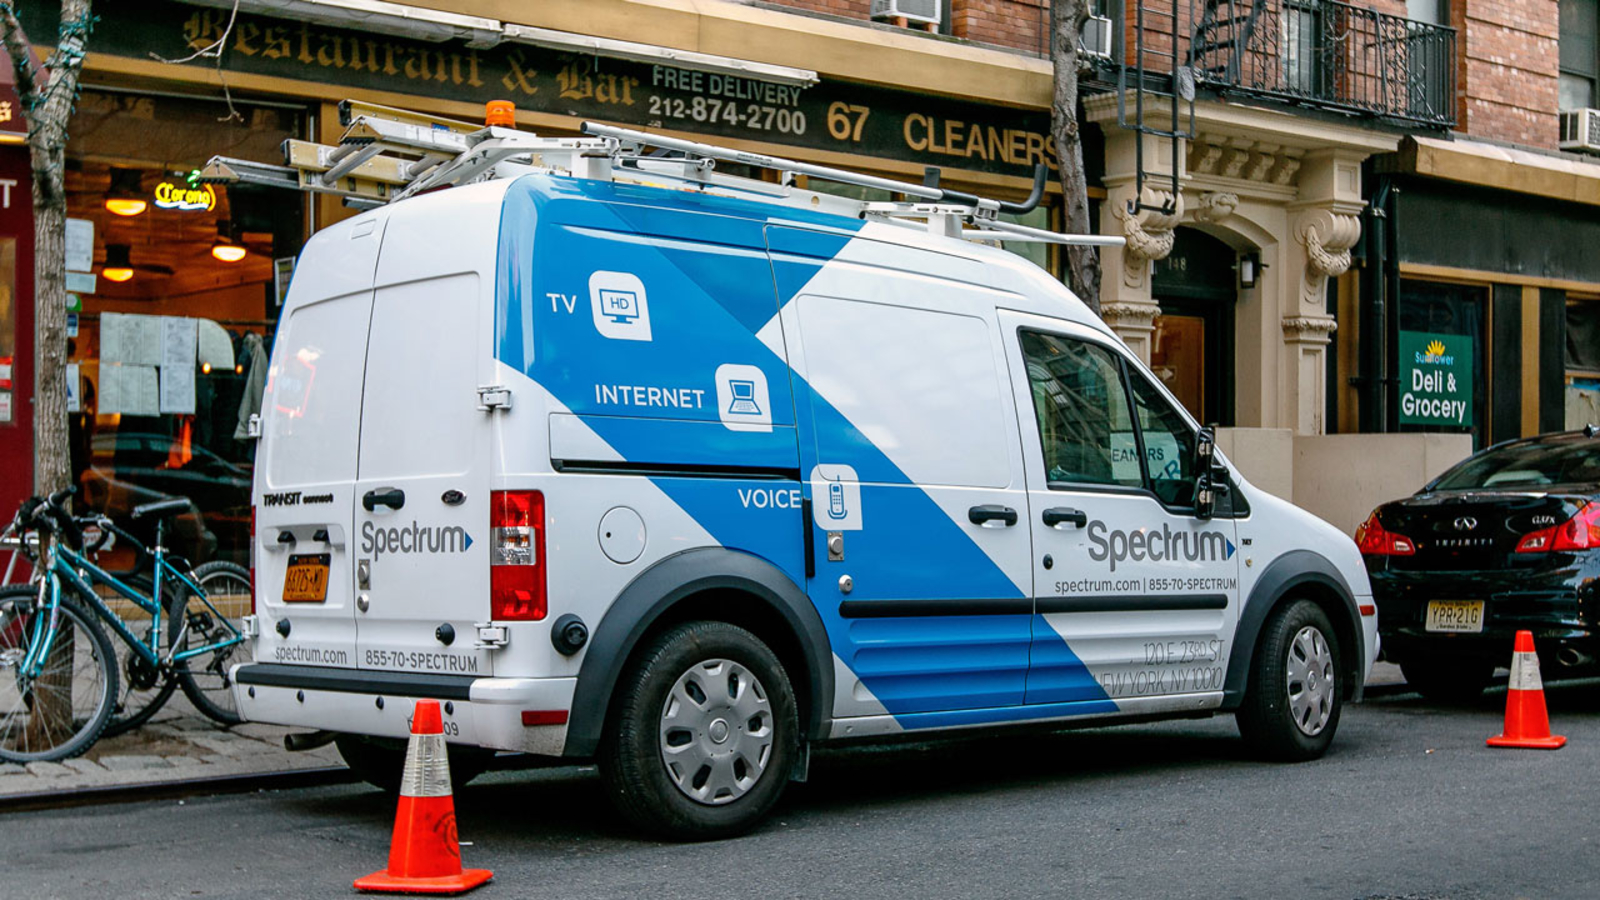 Cable Company makes use of private label services to install and service new customers